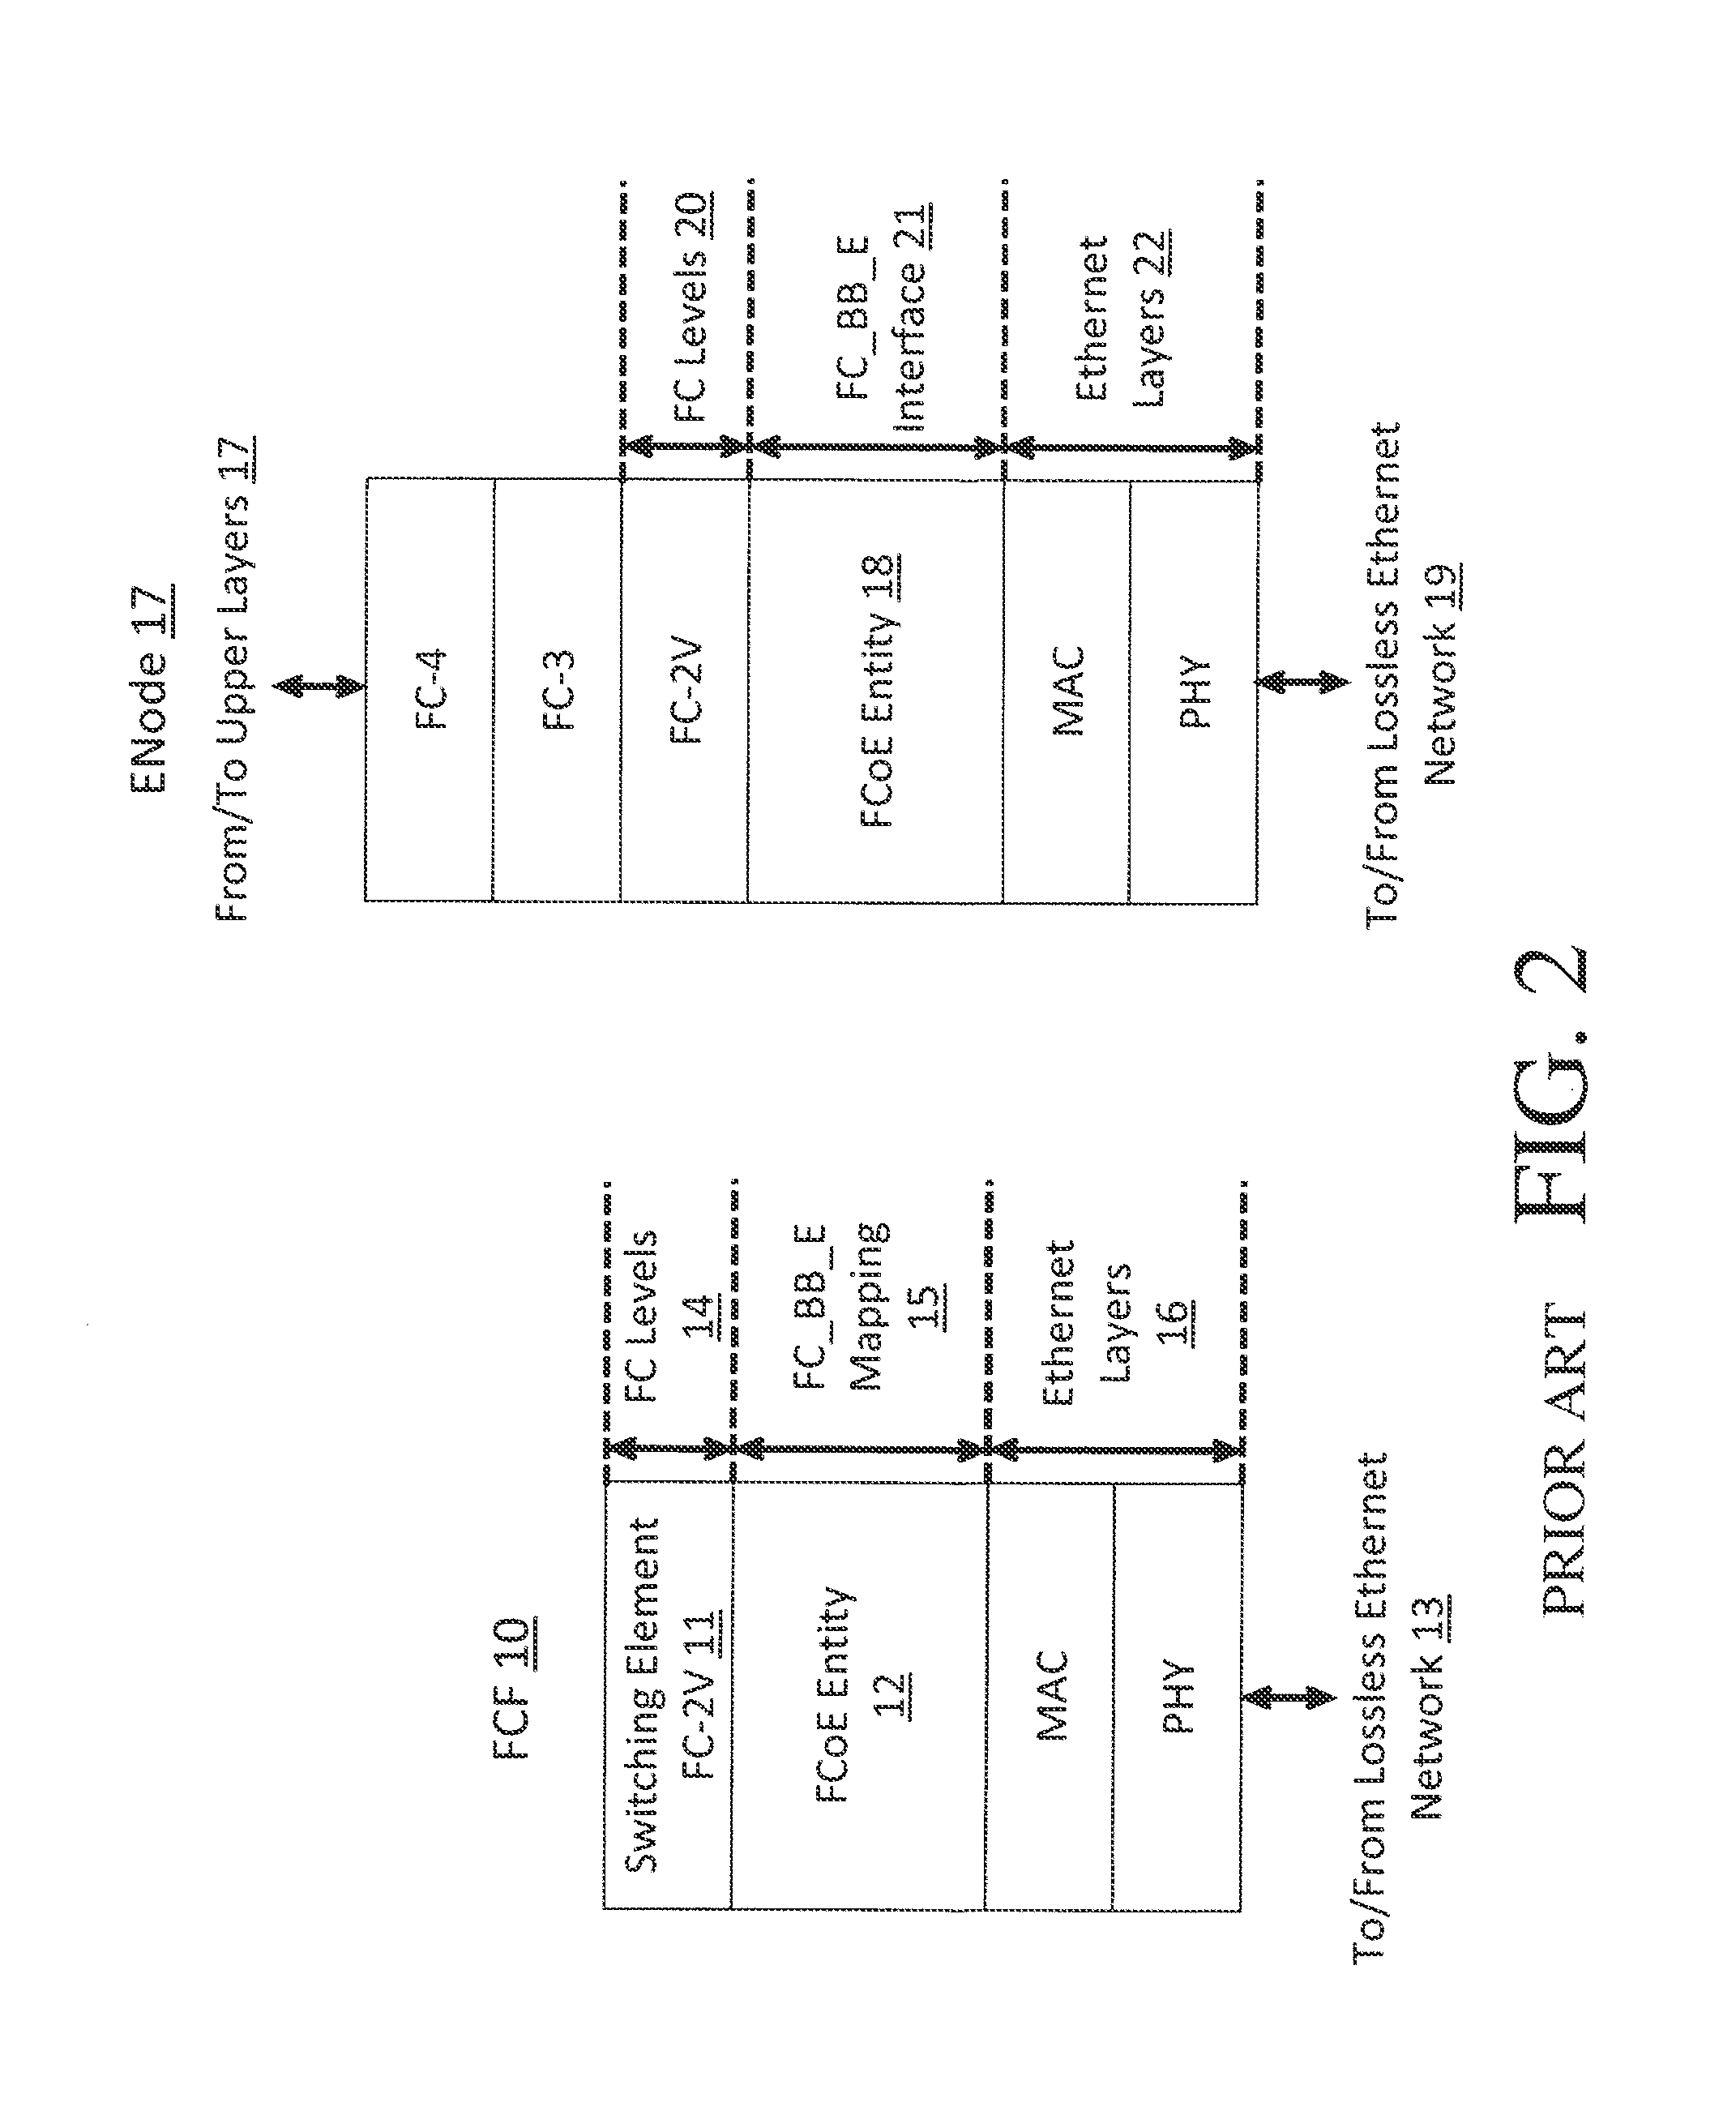 Methods, systems and apparatus for the interconnection of fibre channel over ethernet devices using shortest path bridging